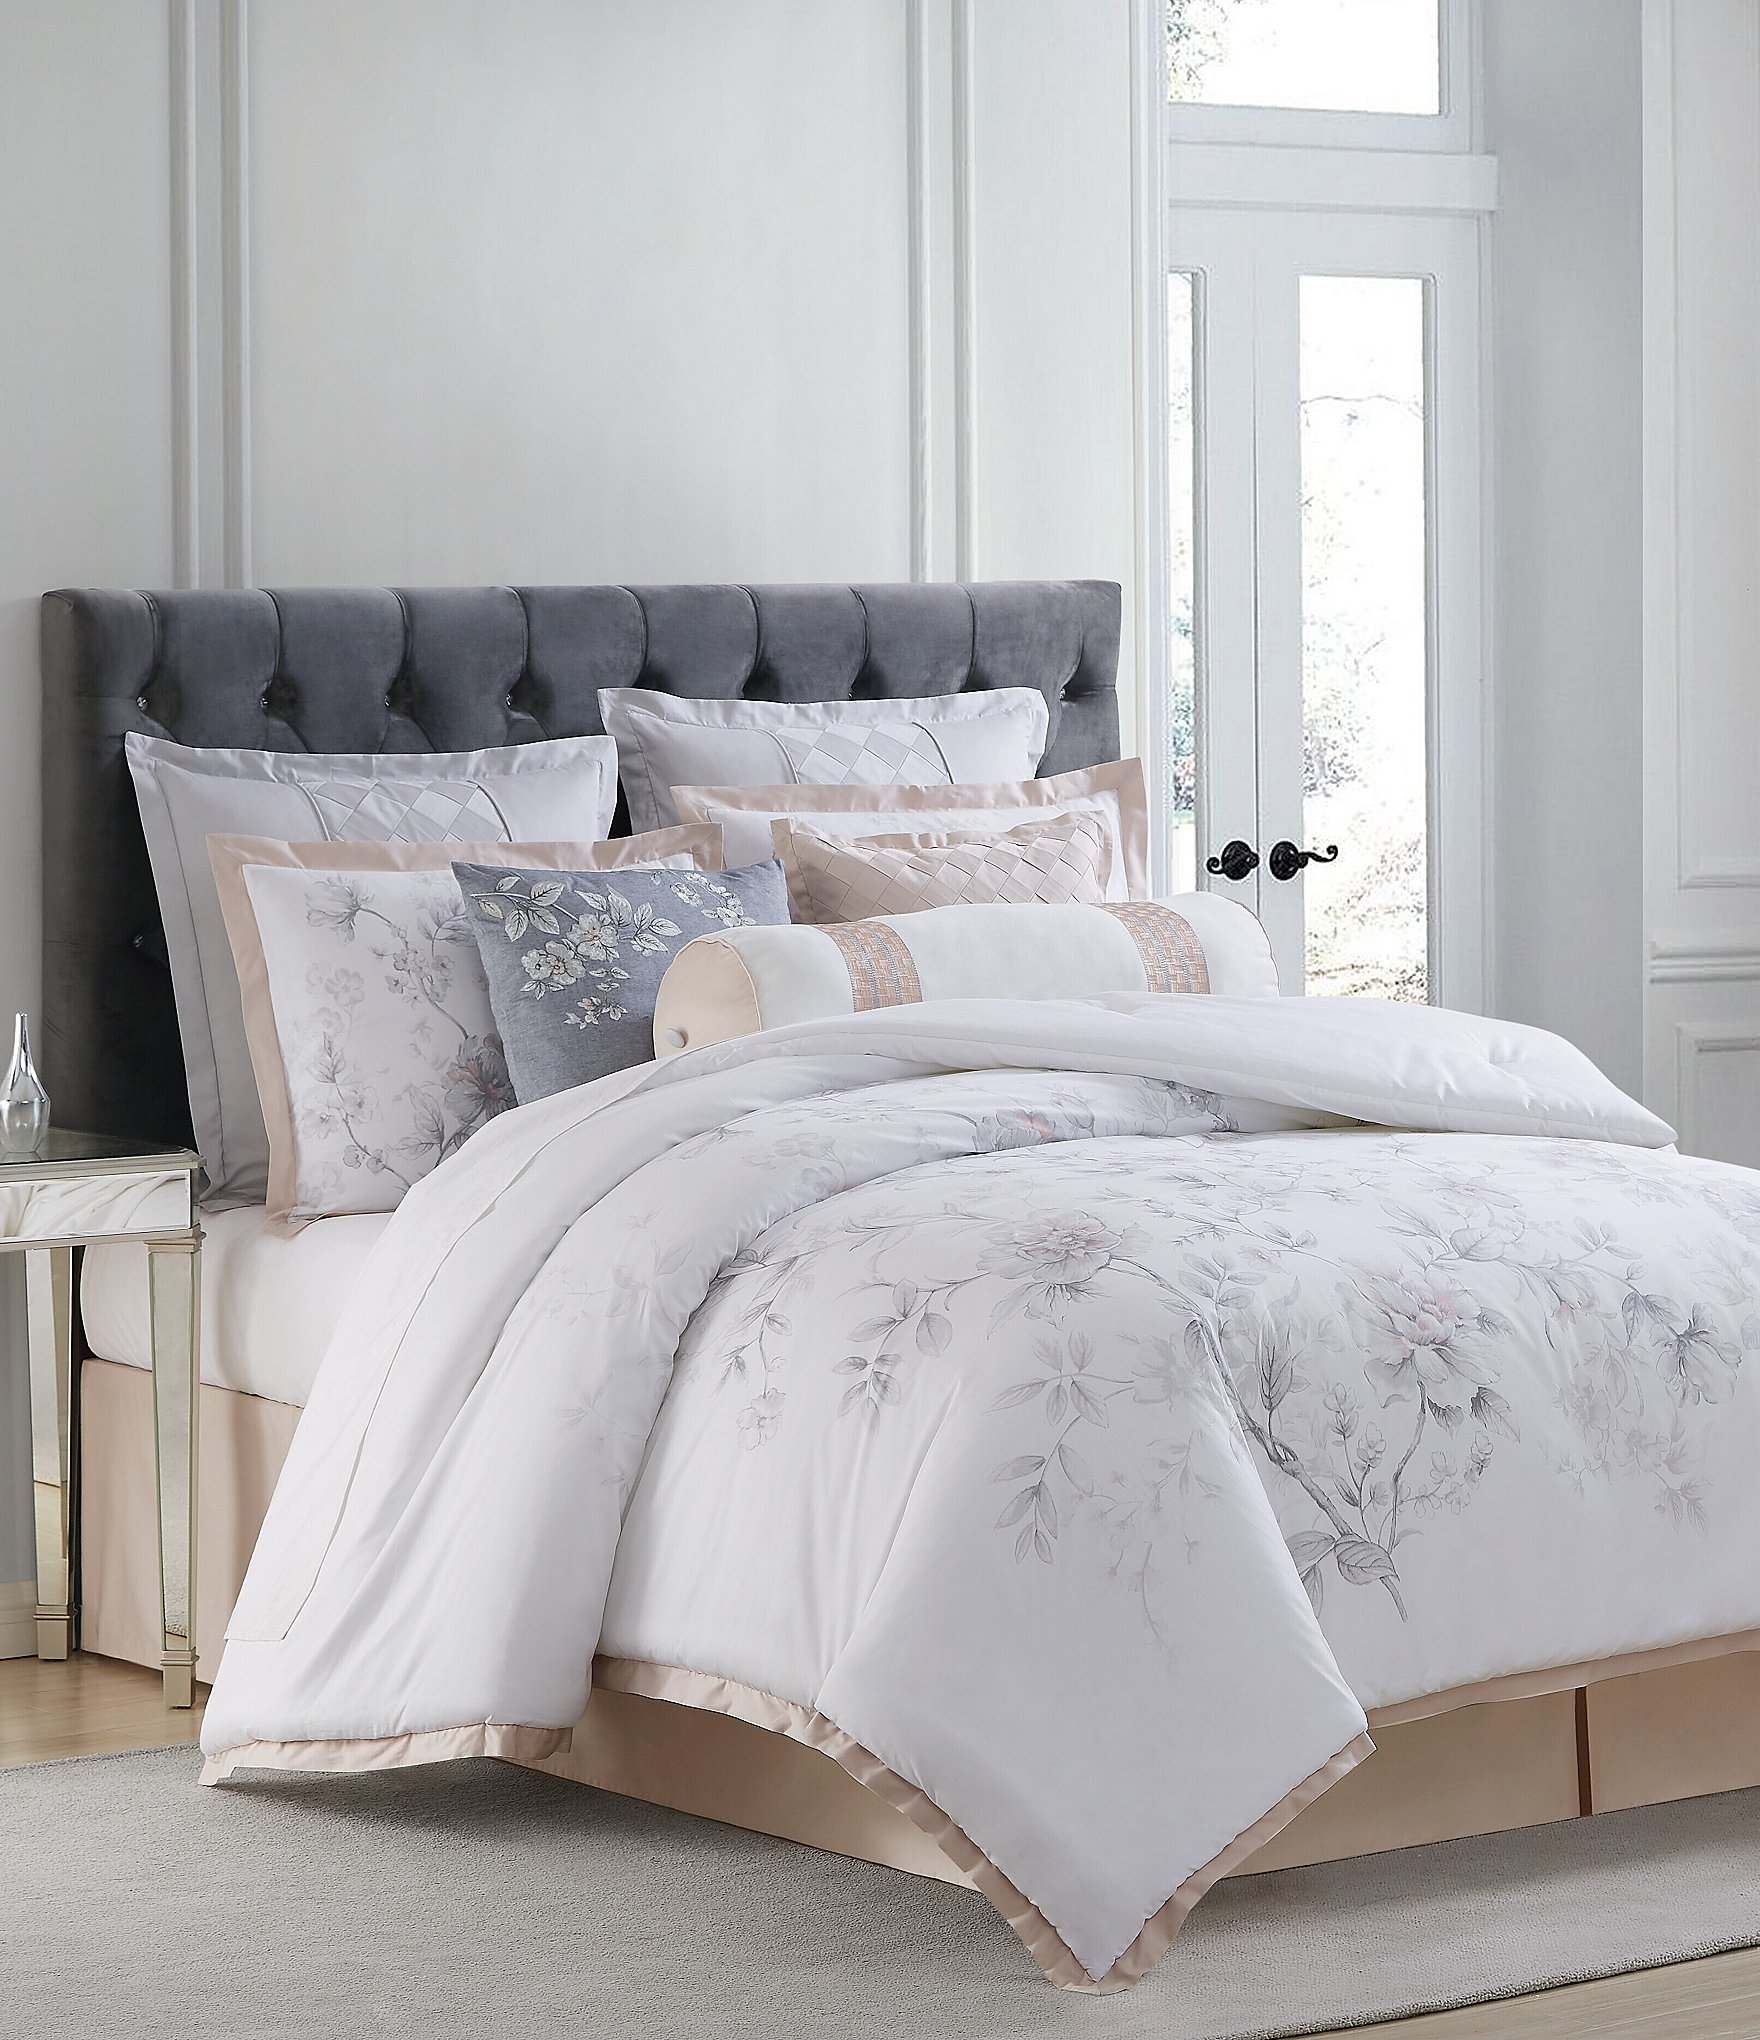 Charisma Bedding Collections, Comforters, Quilts, Duvets & Sheets